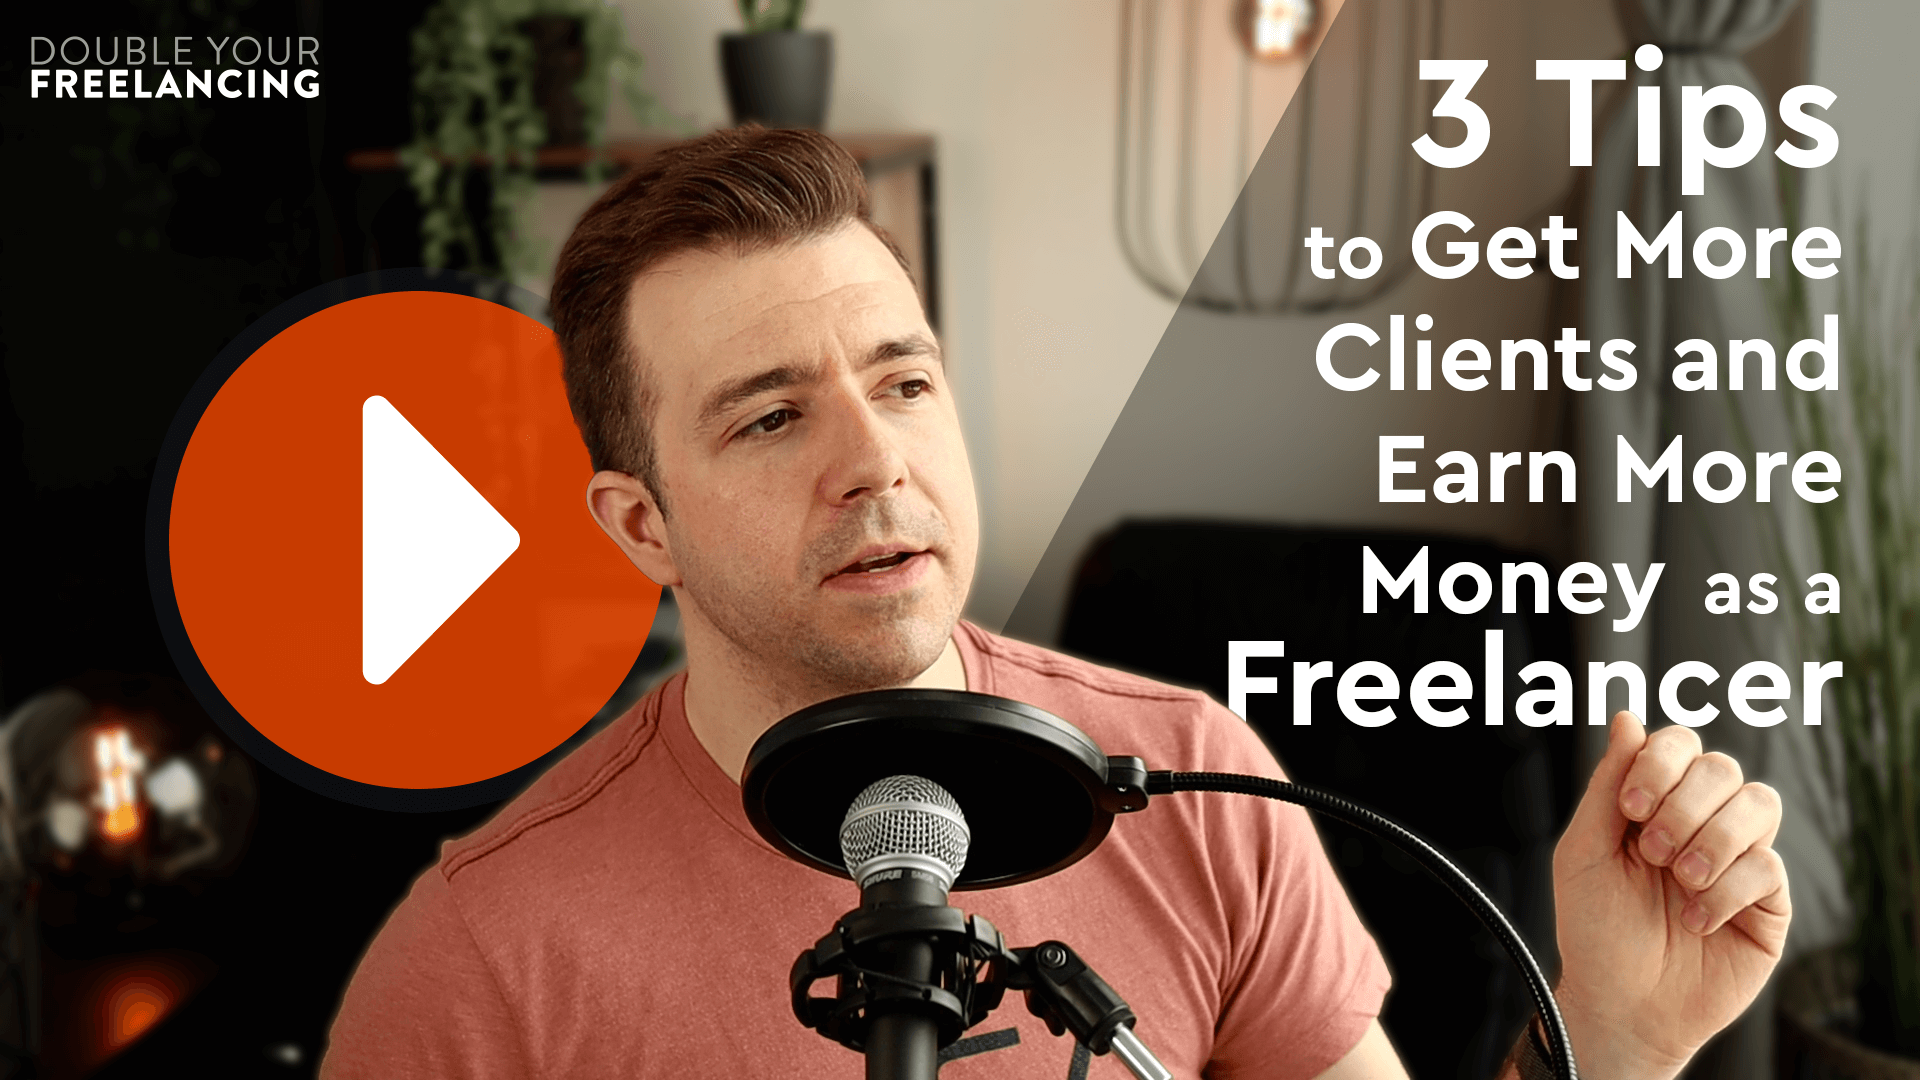 [Video] 3 Tips To Get More Clients and Earn More Money as a Freelancer